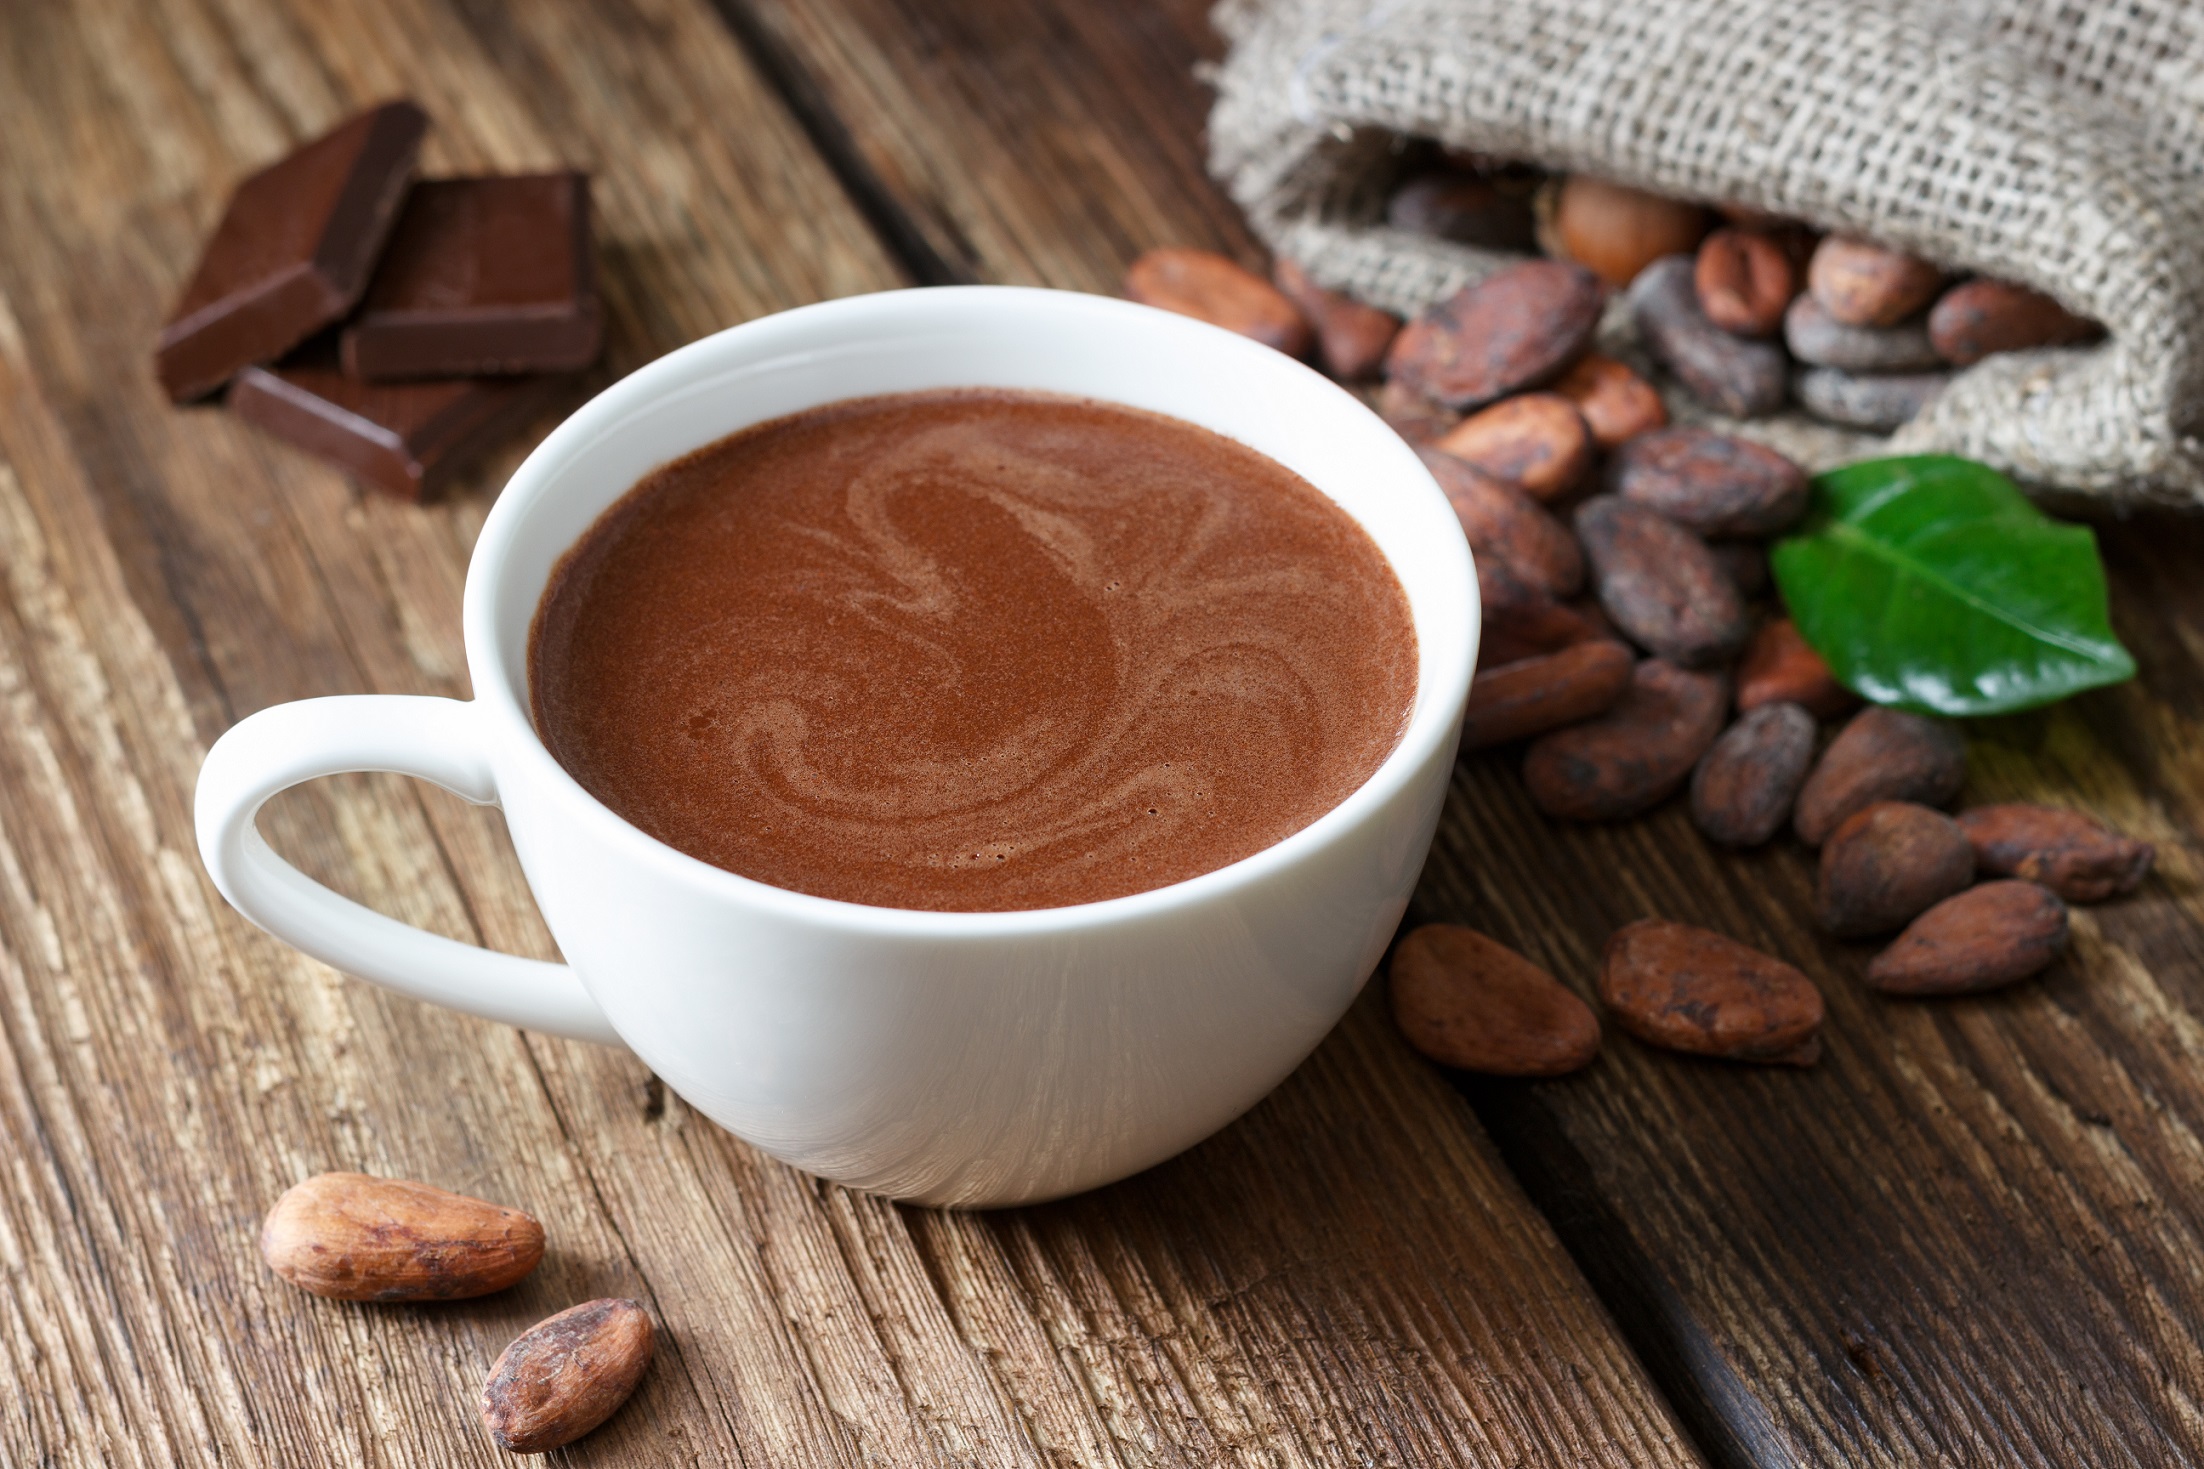 How Cocoa Protects The Heart Healing Practice Live Feeds 